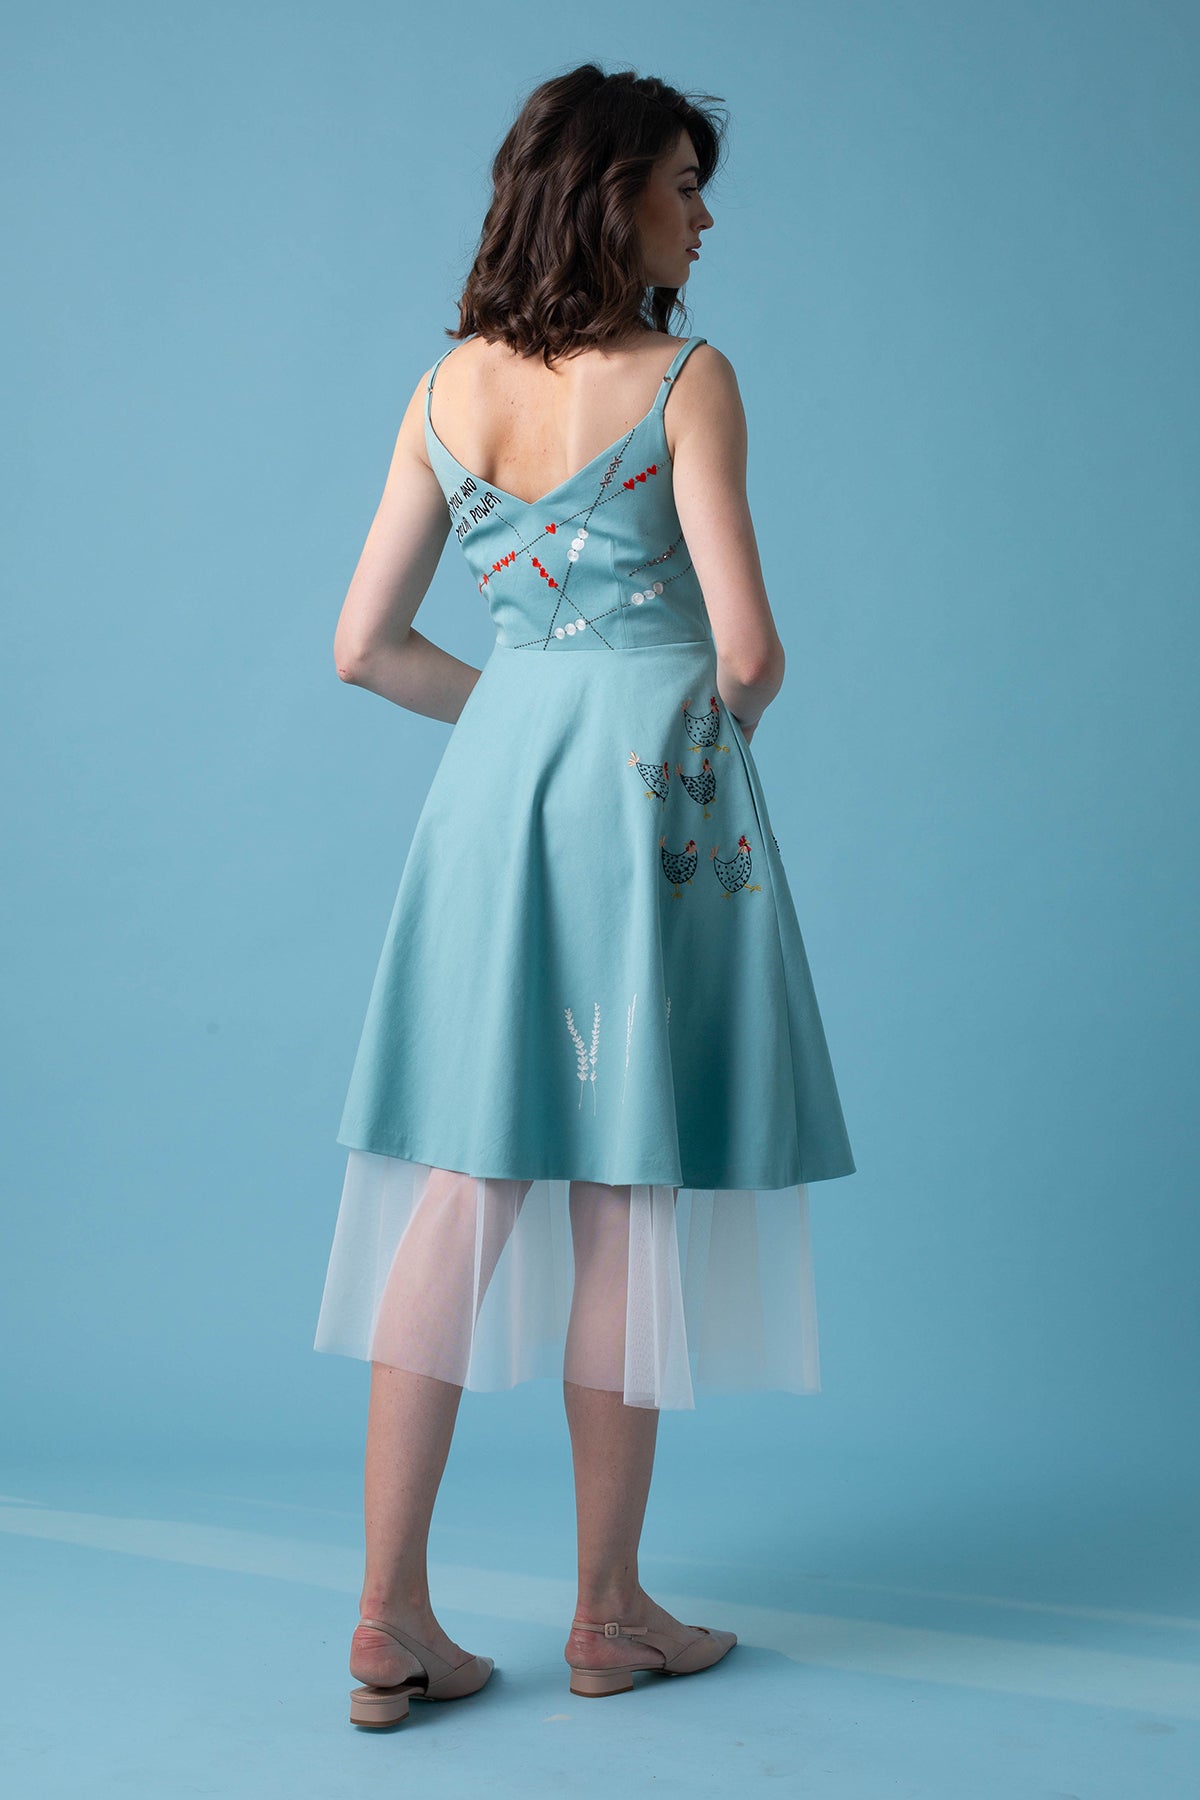 Childhood Spaghetti Strap Dress With Tulle Layer